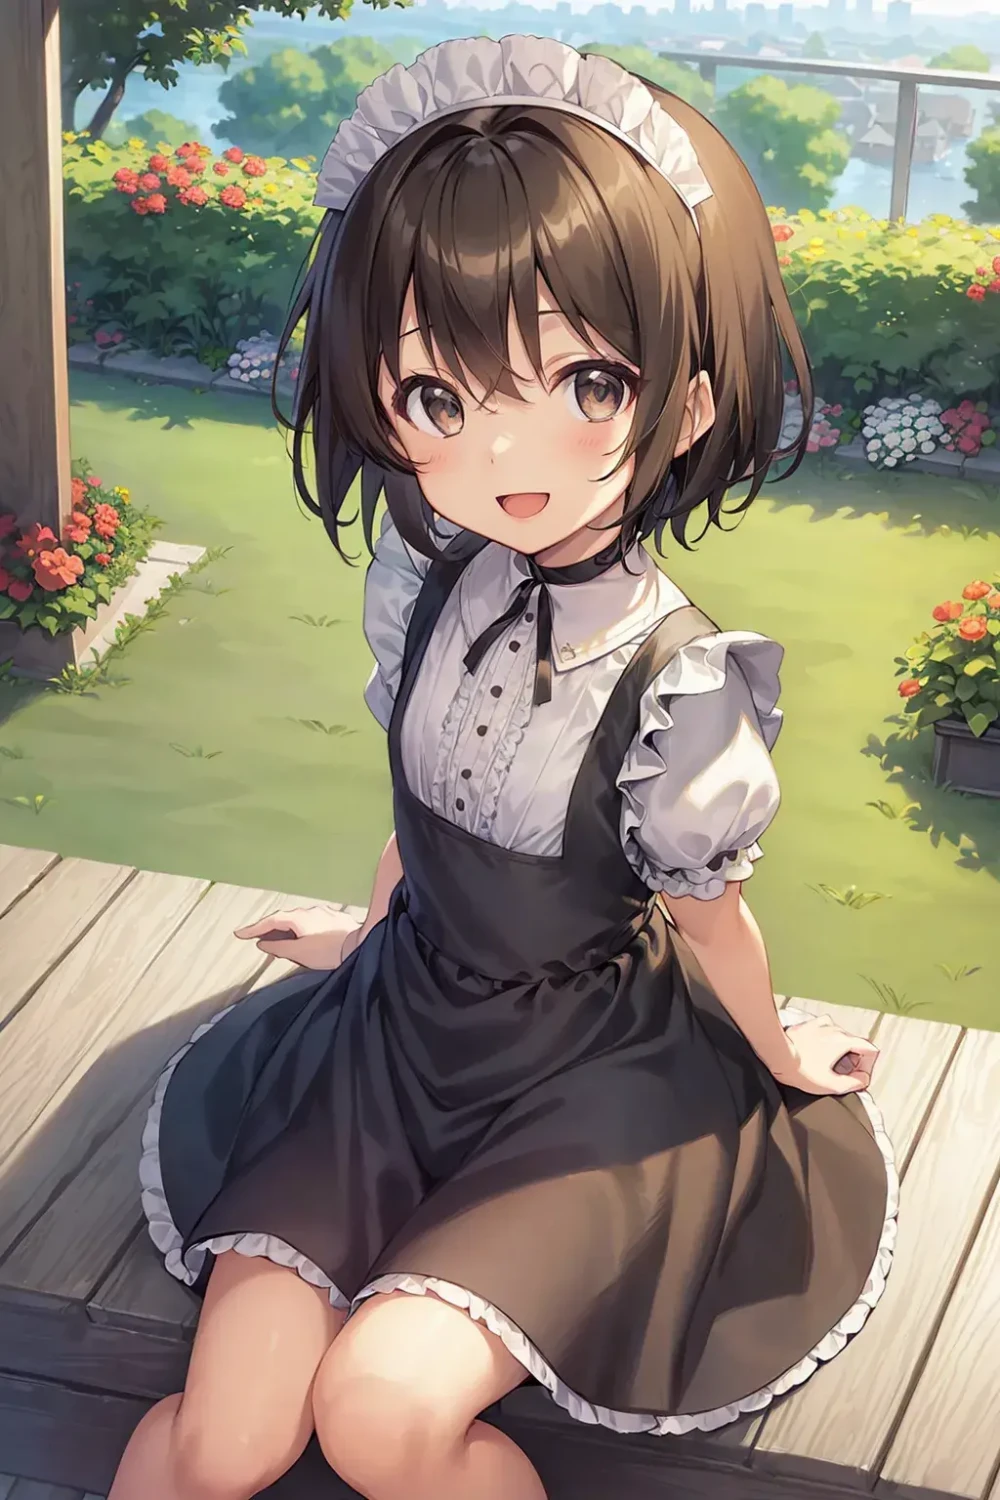 maid-anime-style-all-ages-47